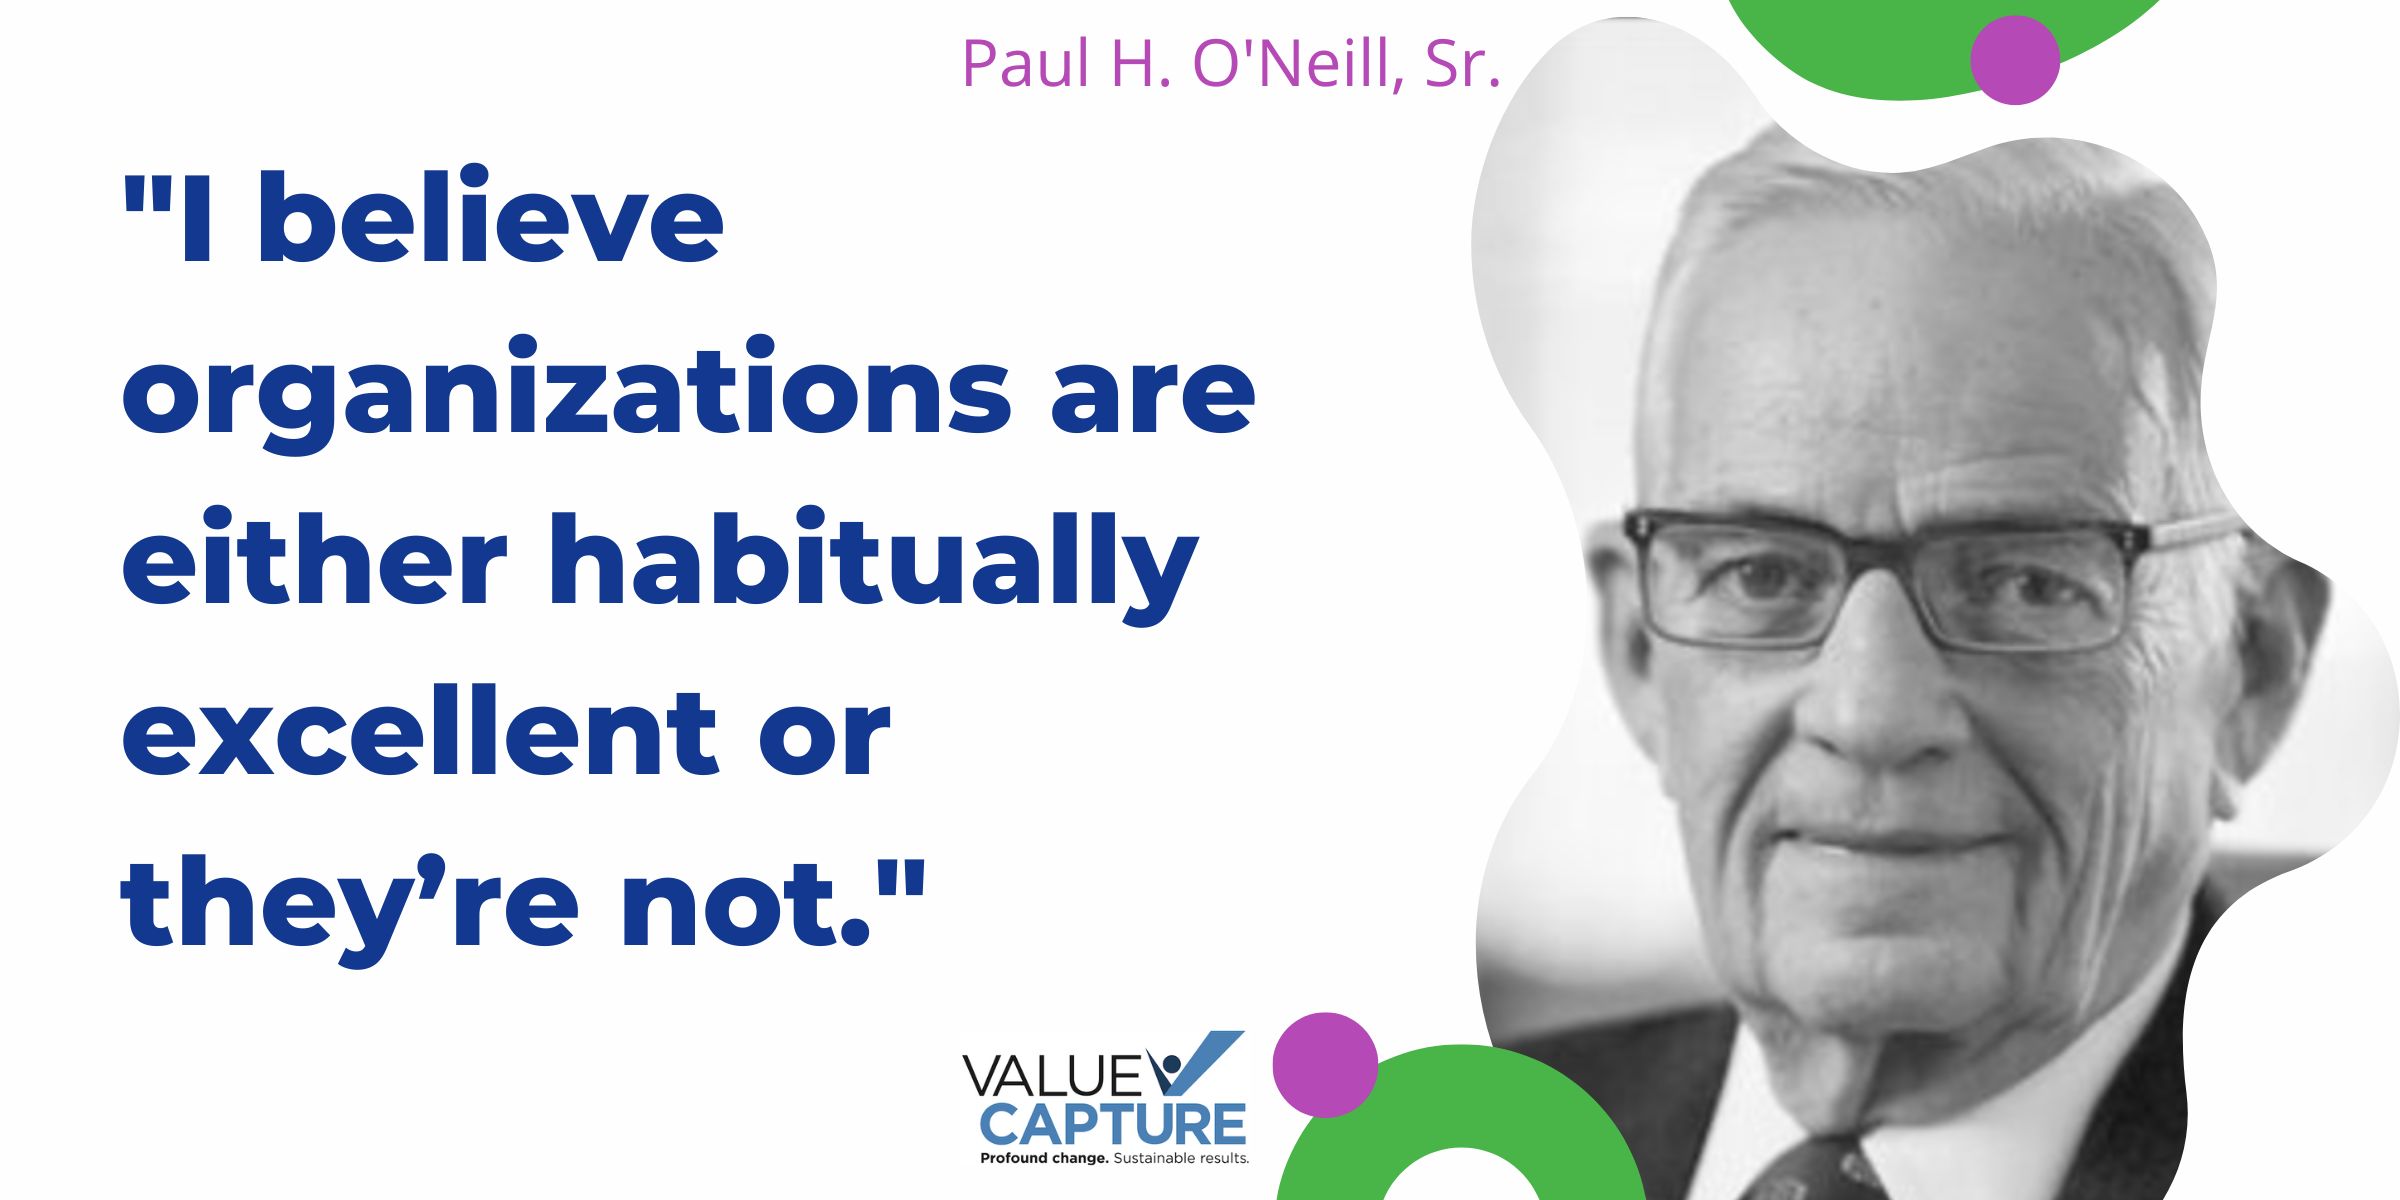 "I believe organizations are either habitually excellent or they’re not." Paul O'Neill